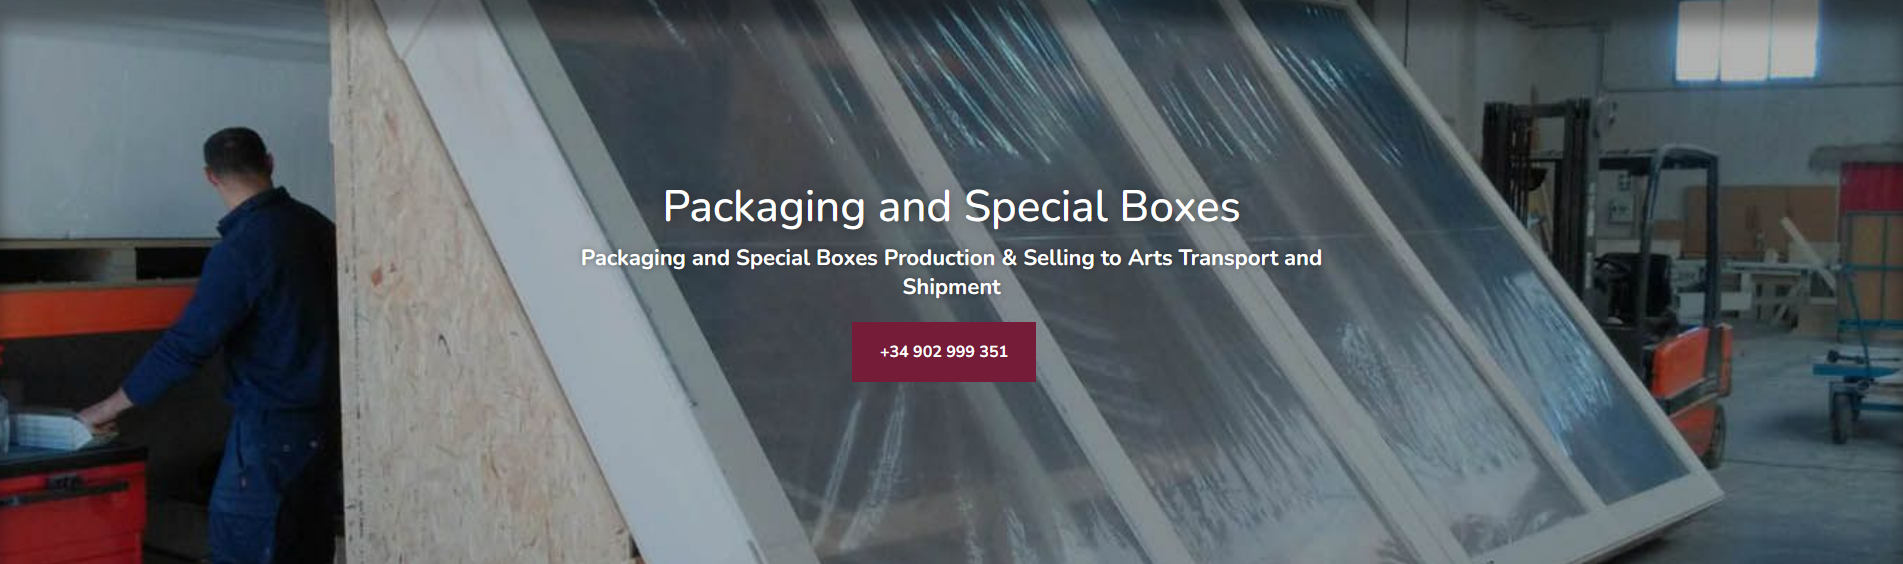 Packaging and Special Boxes